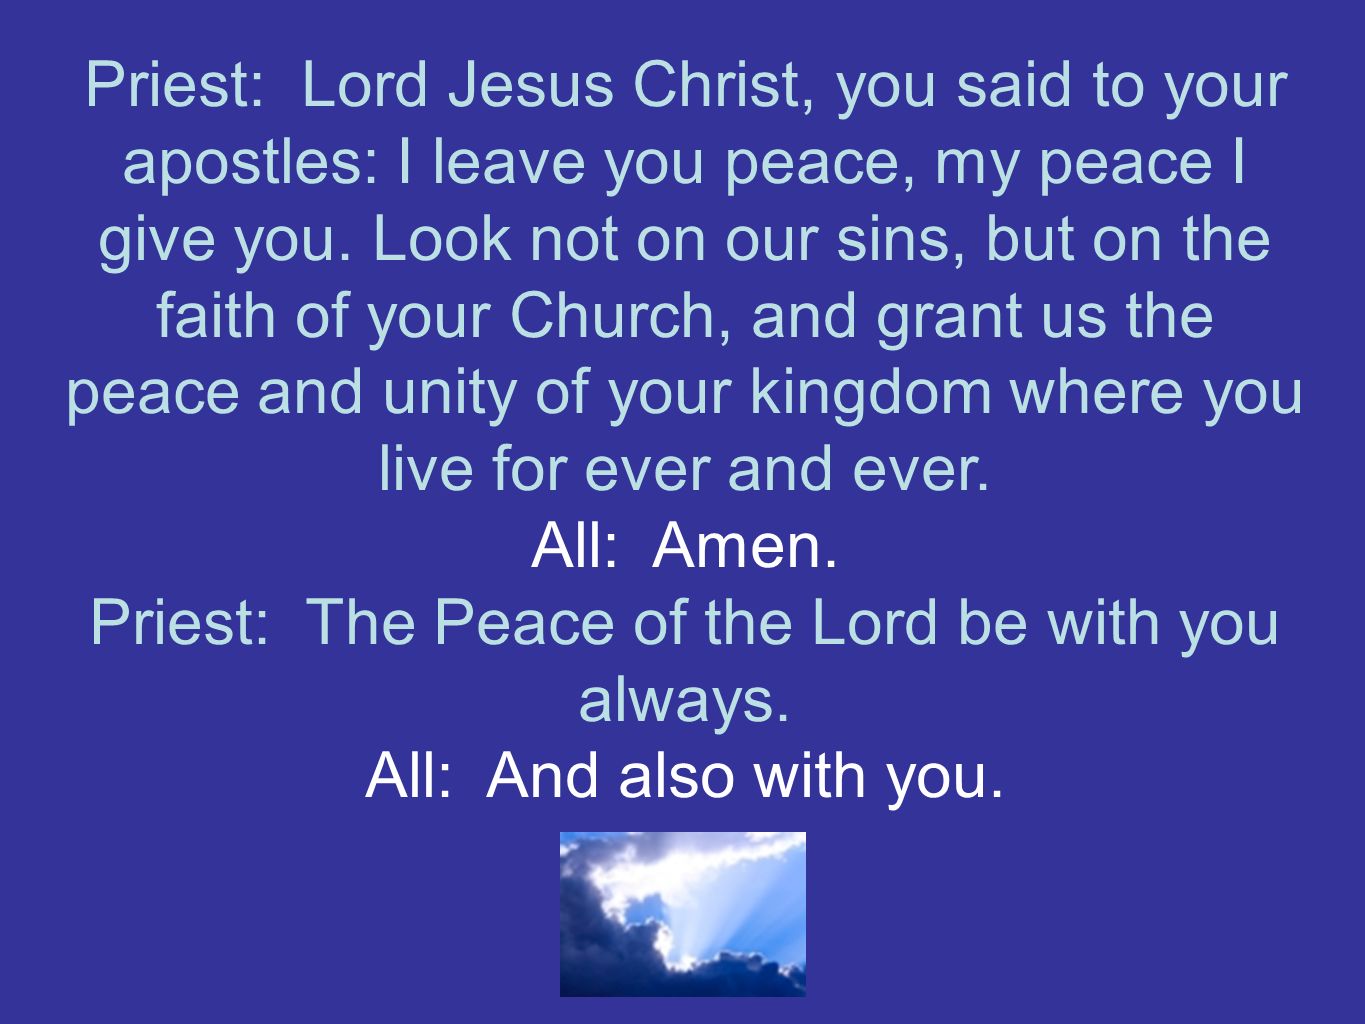 Priest: Lord Jesus Christ, you said to your apostles: I leave you peace, my peace I give you.